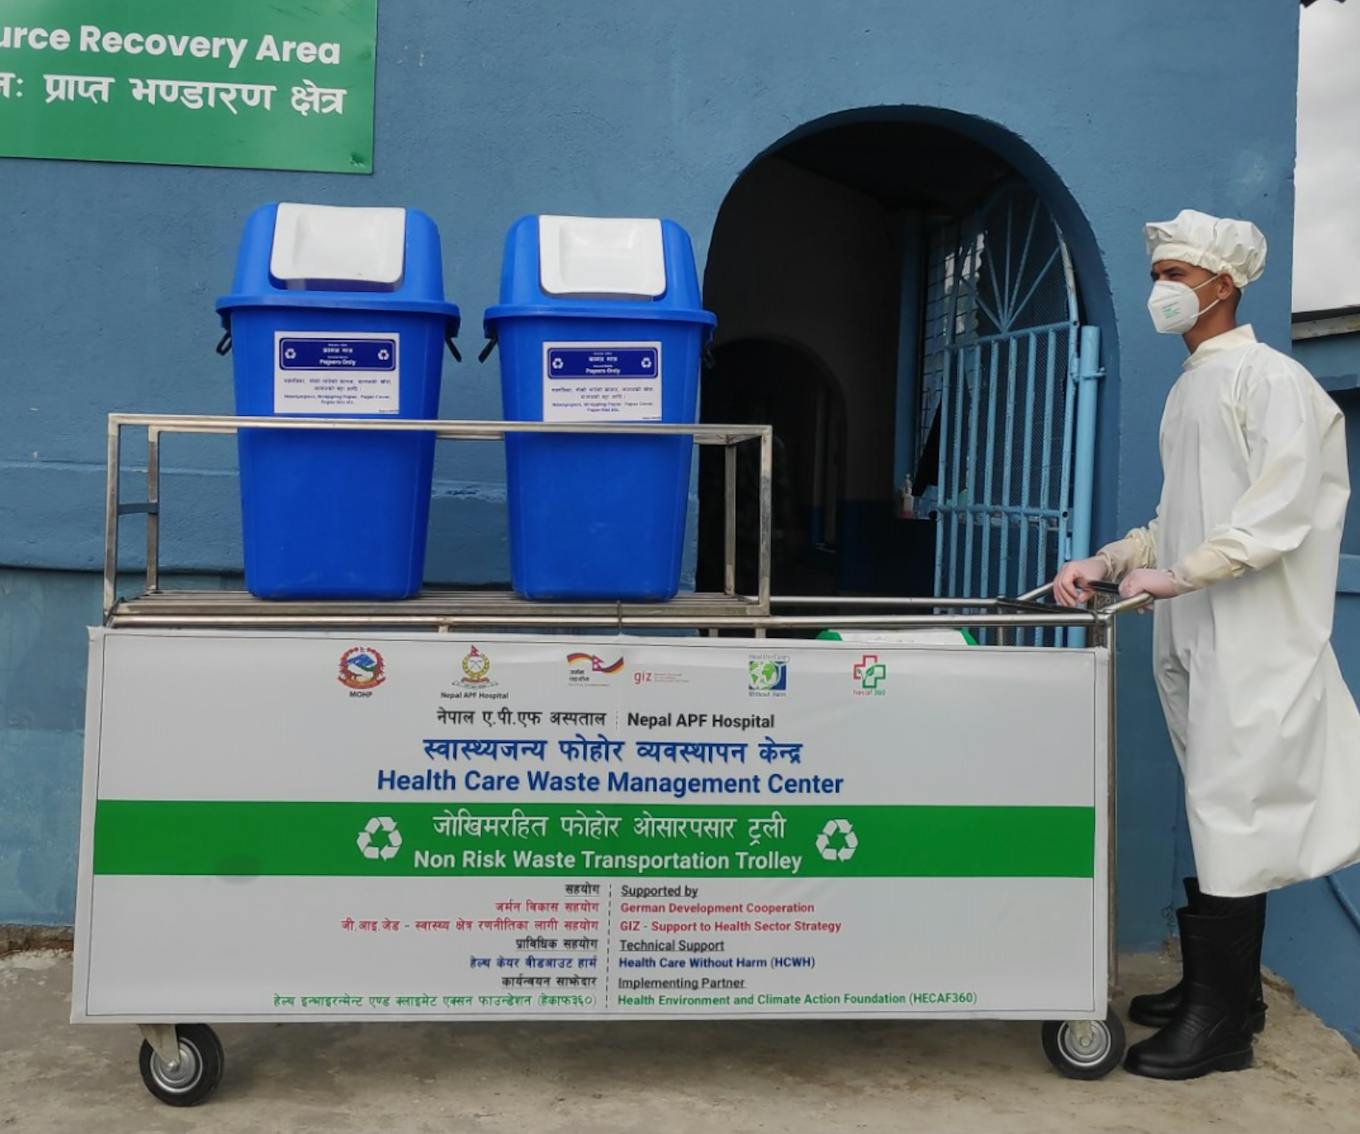 A waste transportation unit at a hospital in Nepal